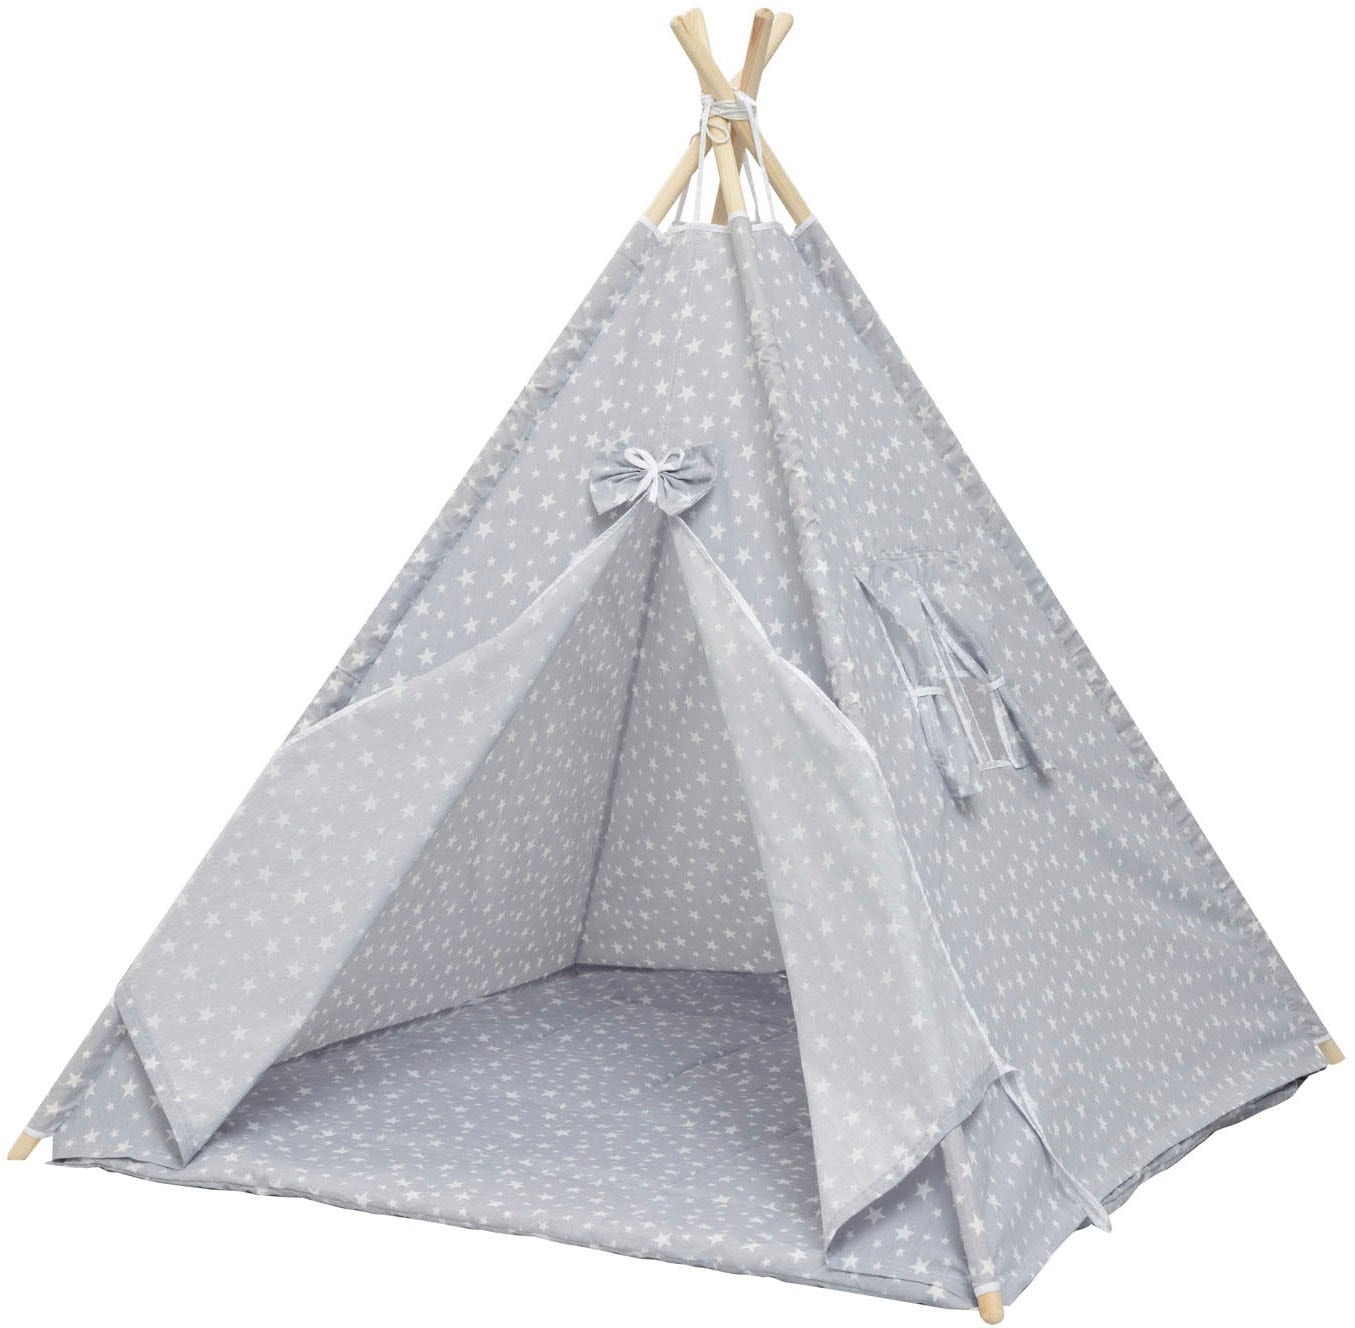 Spielzelt »Little Tent«, (1 tlg.), Made in Europe